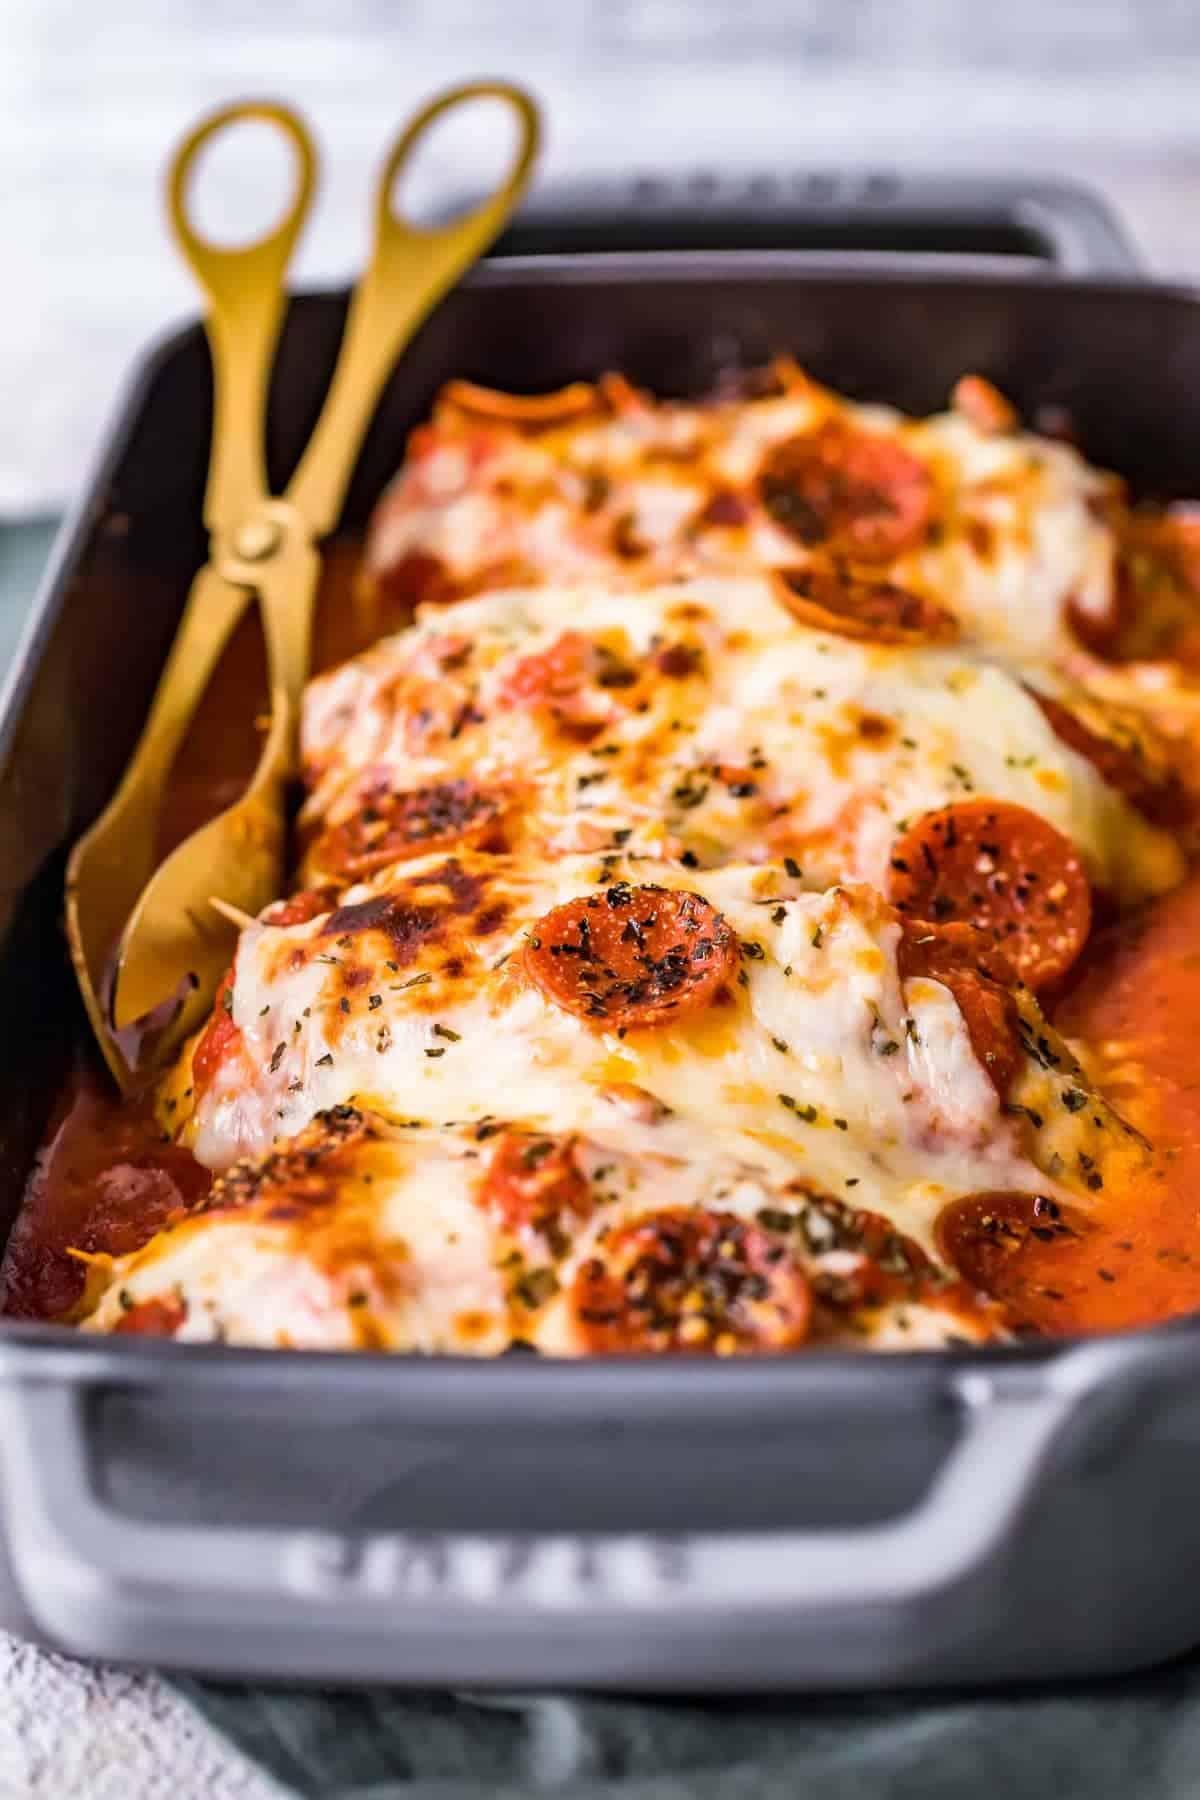 Cheese and pepperoni cooked on top of chicken breasts